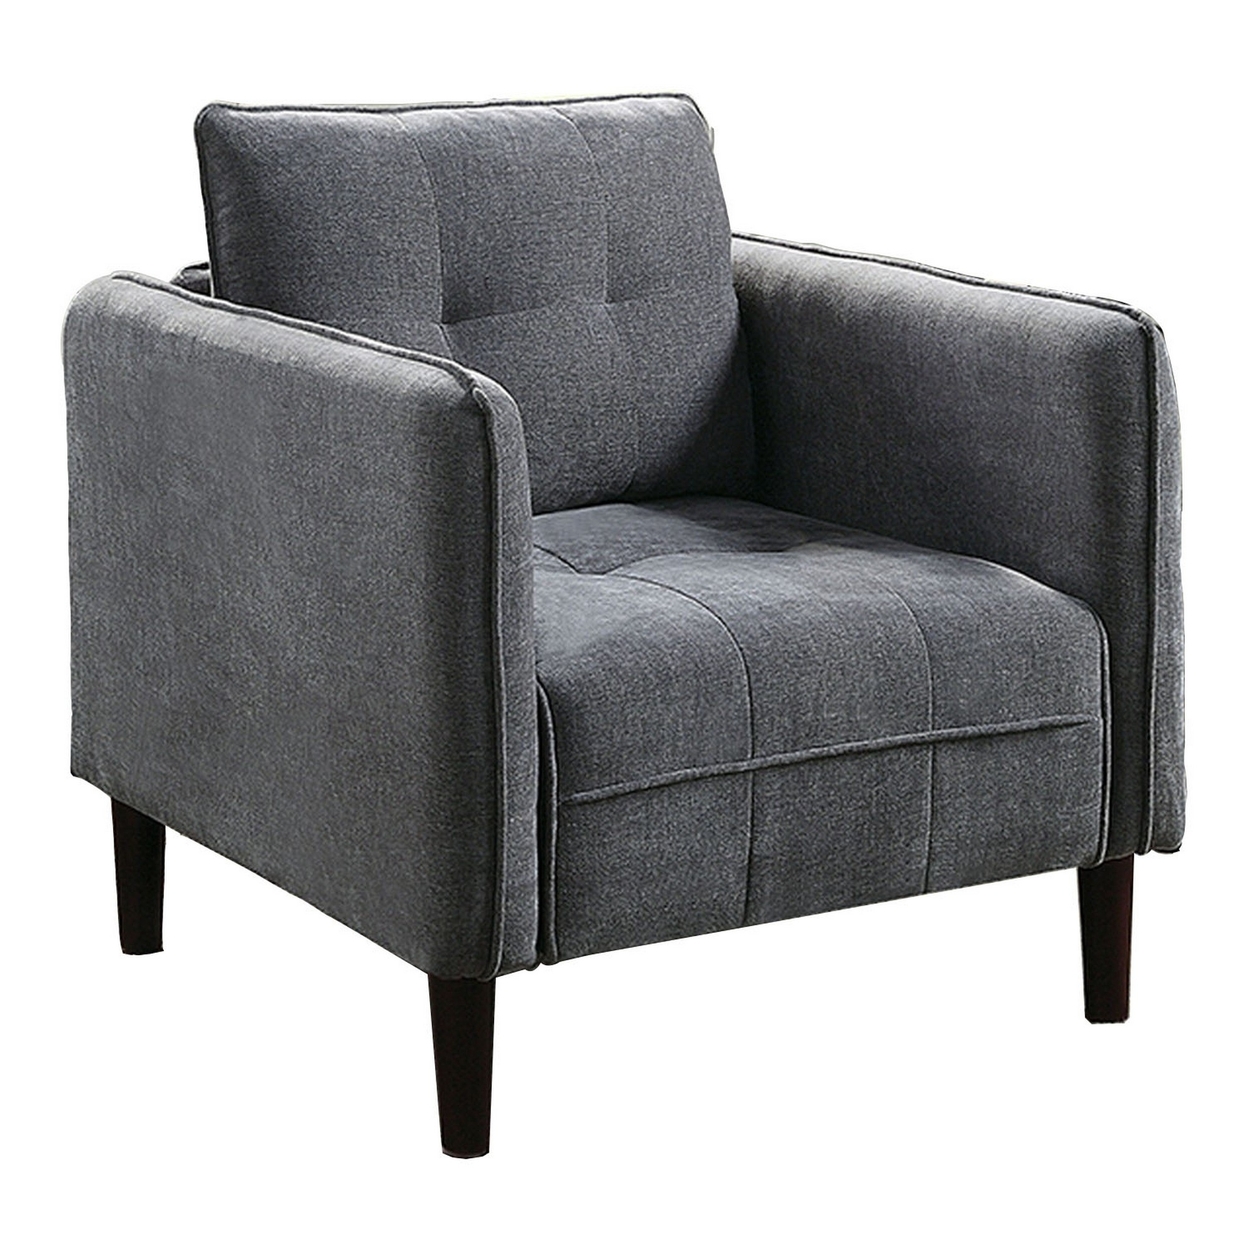 Hak 33 Inch Accent Chair, Rounded Arms, Biscuit Tufting, Wood Legs, Gray - Saltoro Sherpi